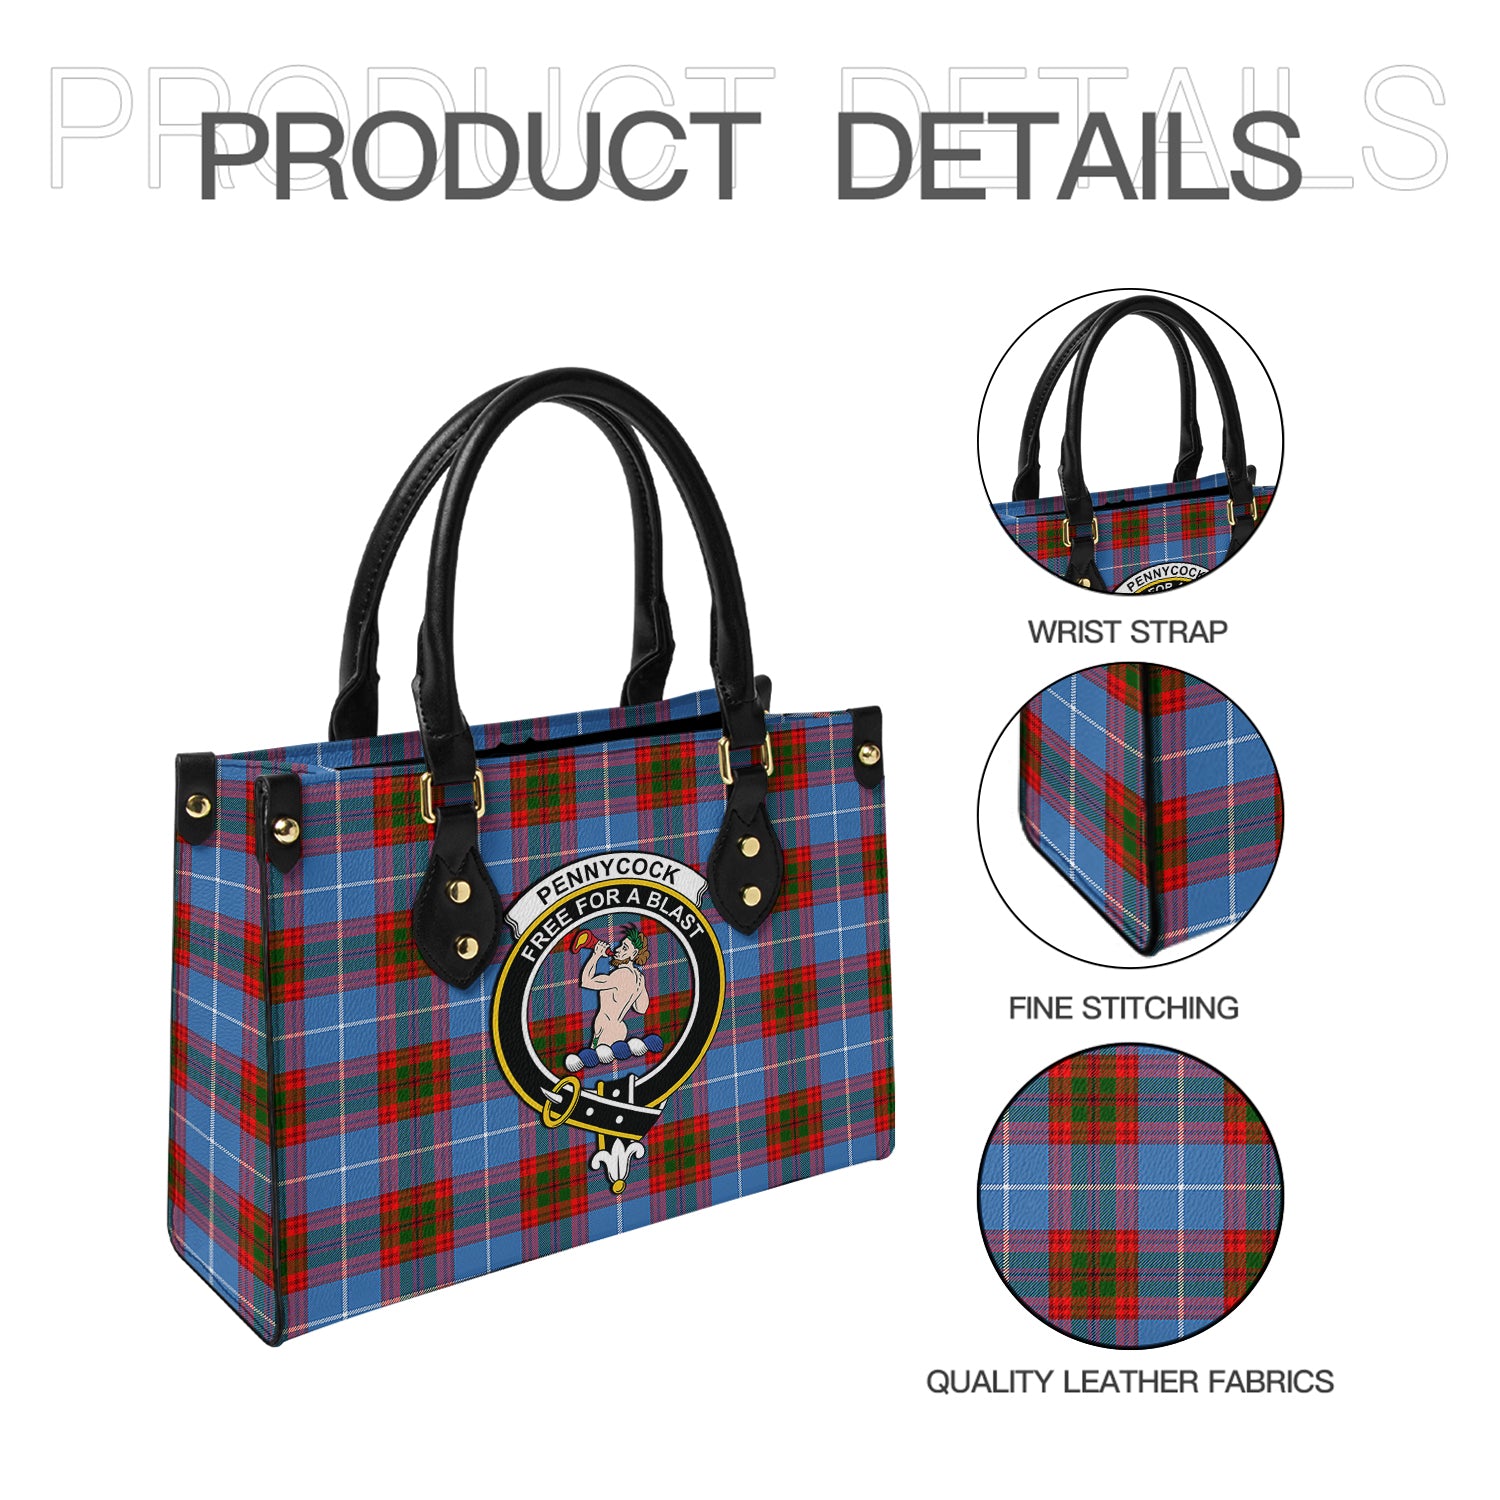 pennycook-tartan-leather-bag-with-family-crest